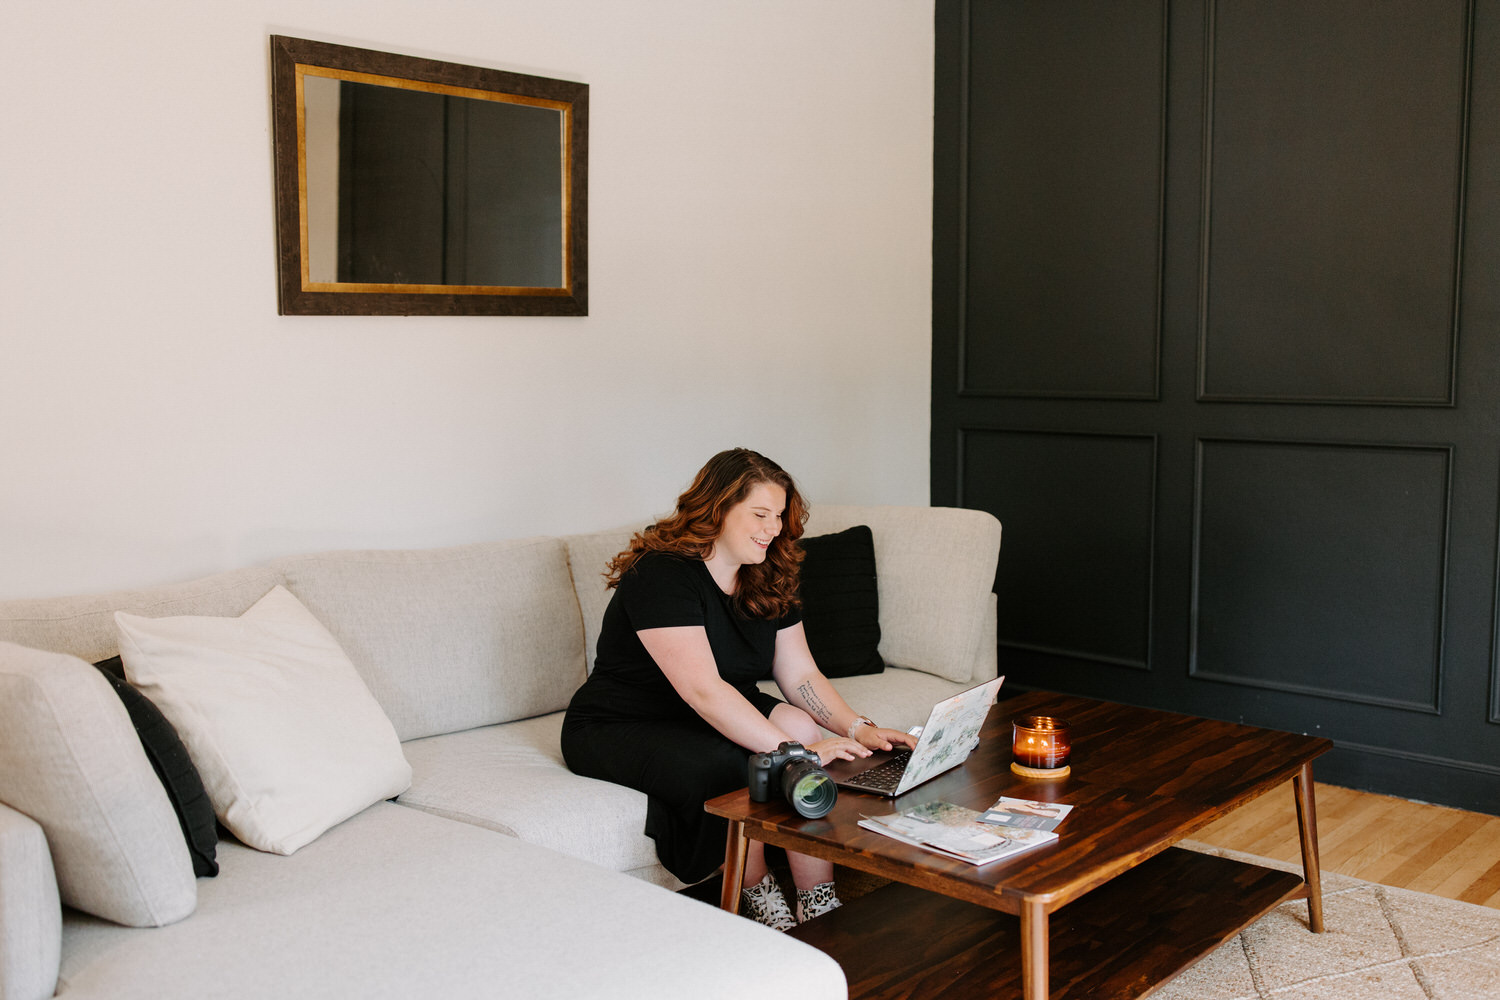 A woman with wavy red hair is sitting on a beige sofa, smiling and working on a laptop. A DSLR camera, a lit candle, and printed materials are on the wooden coffee table in front of her. The room has a minimalist design with a black accent wall and a mirror.